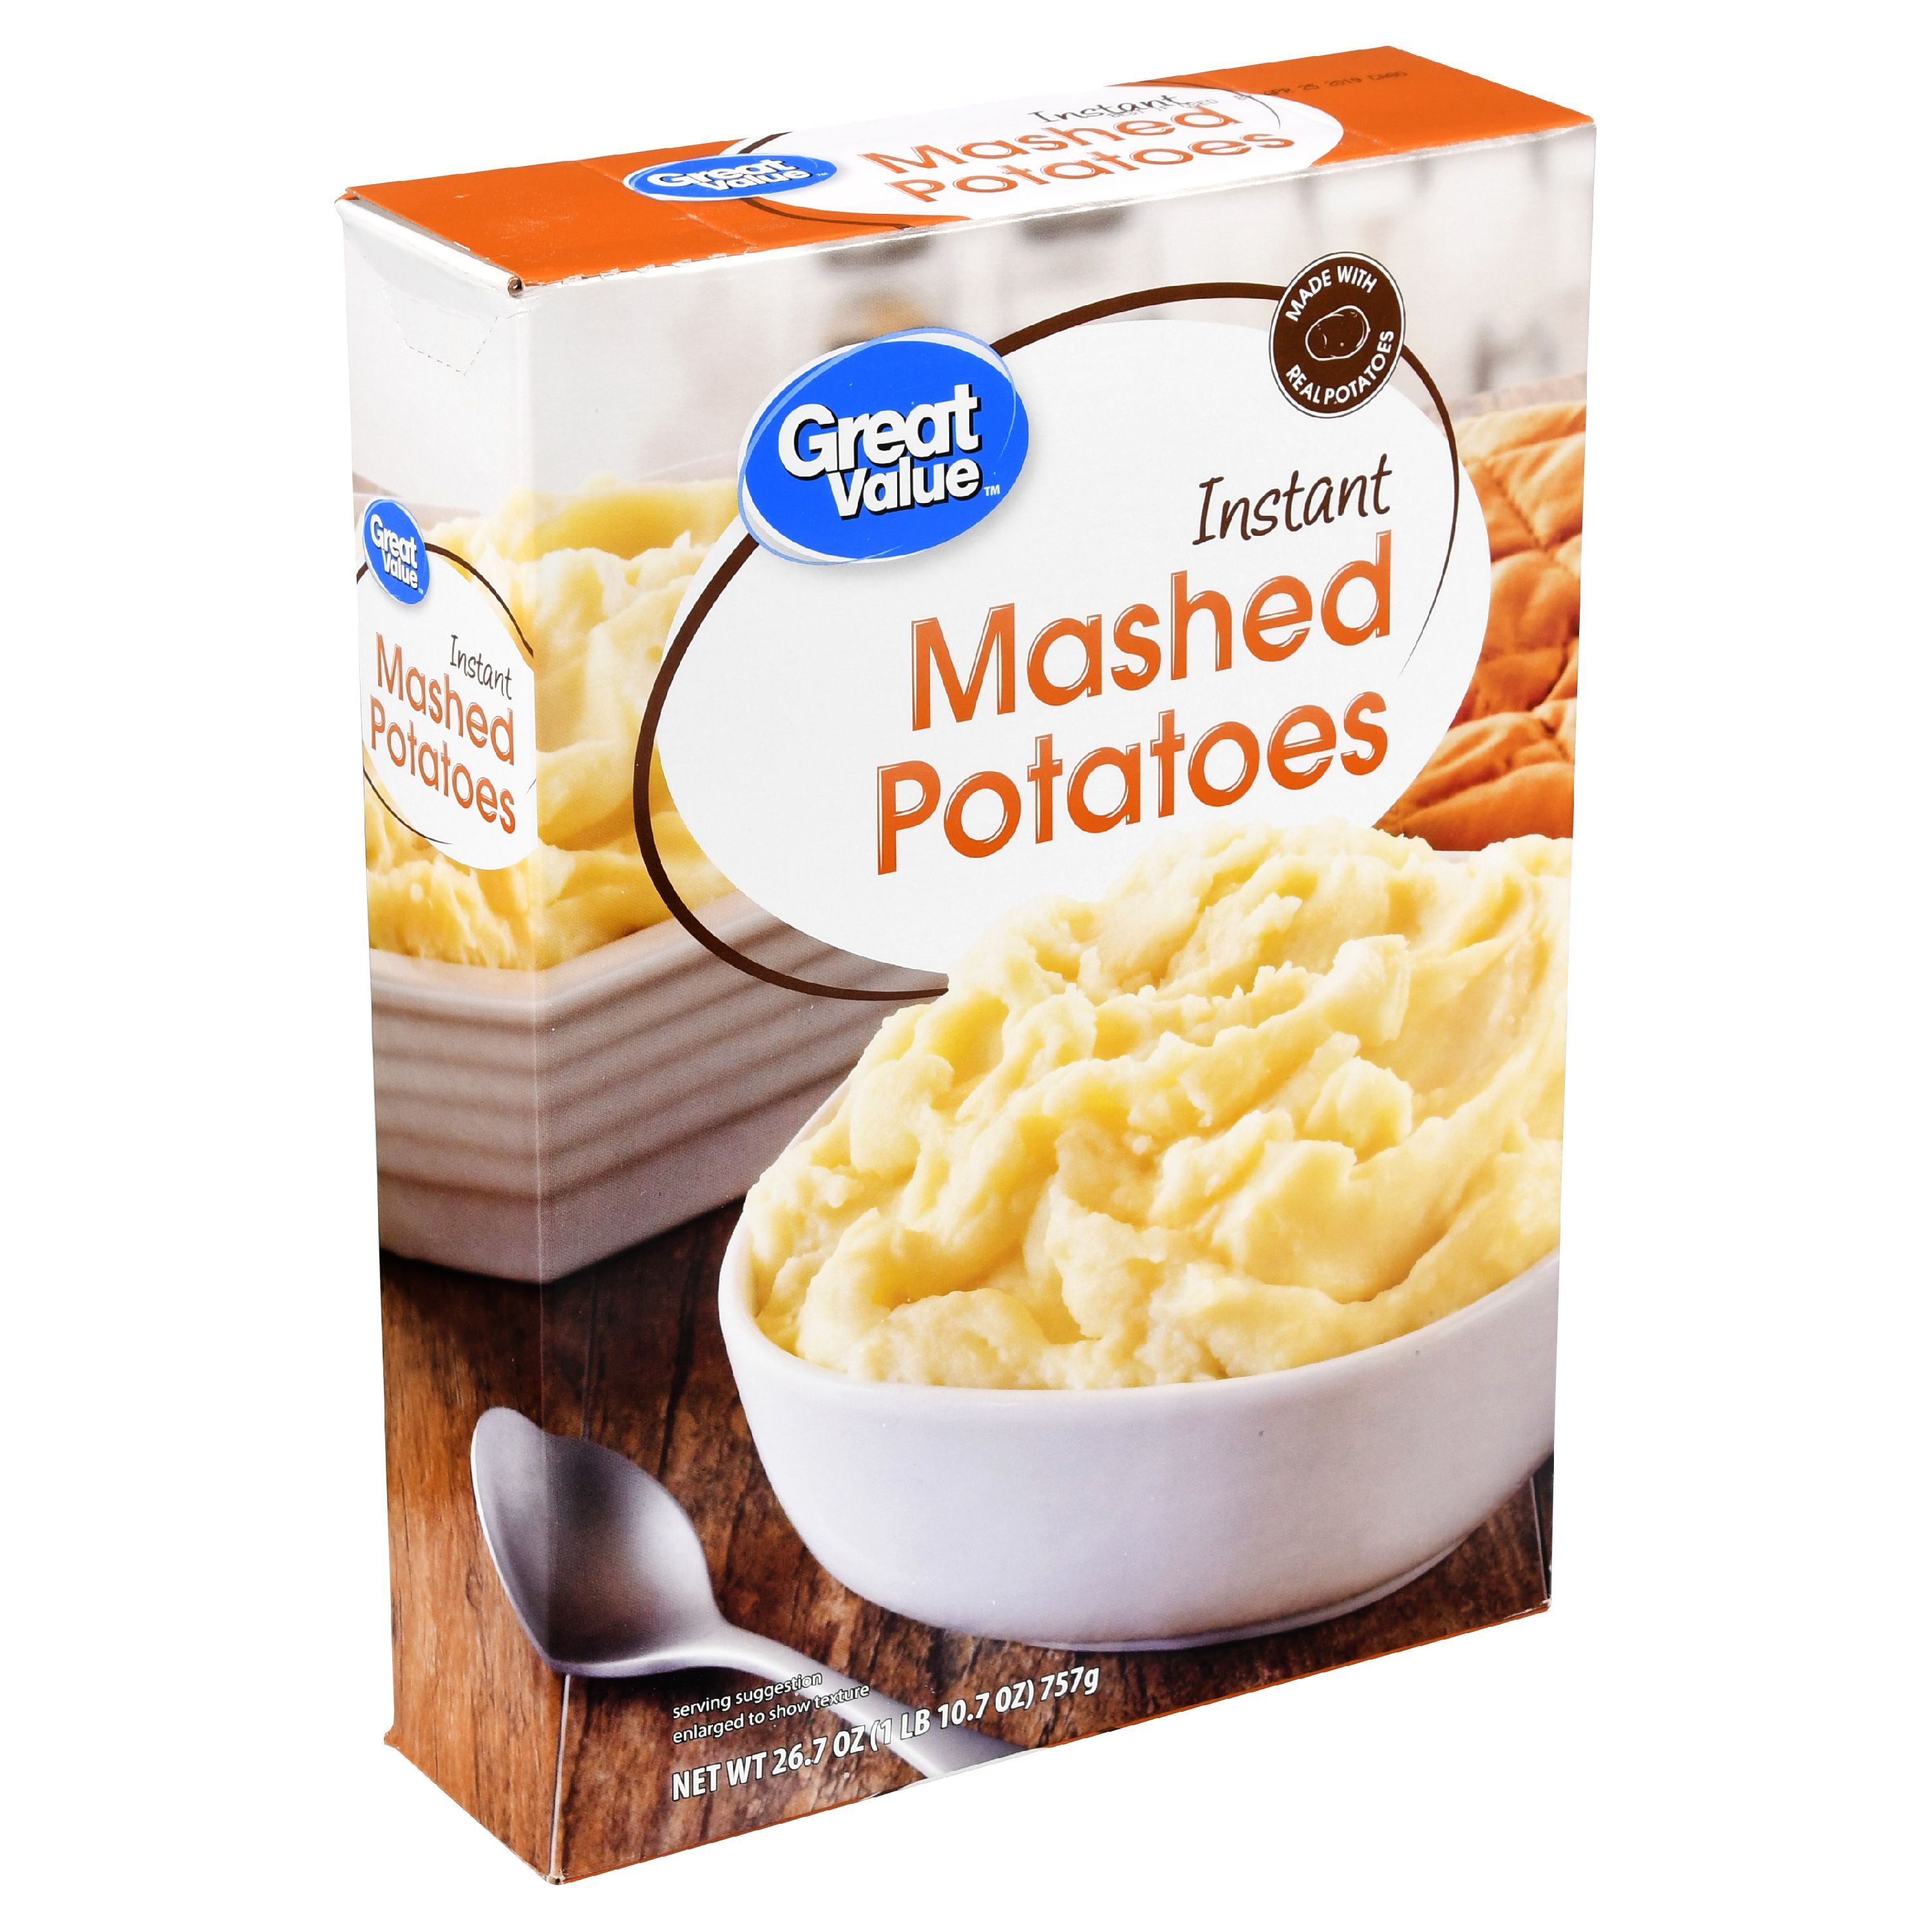 Great Value Instant Mashed Potatoes 26.7 Oz